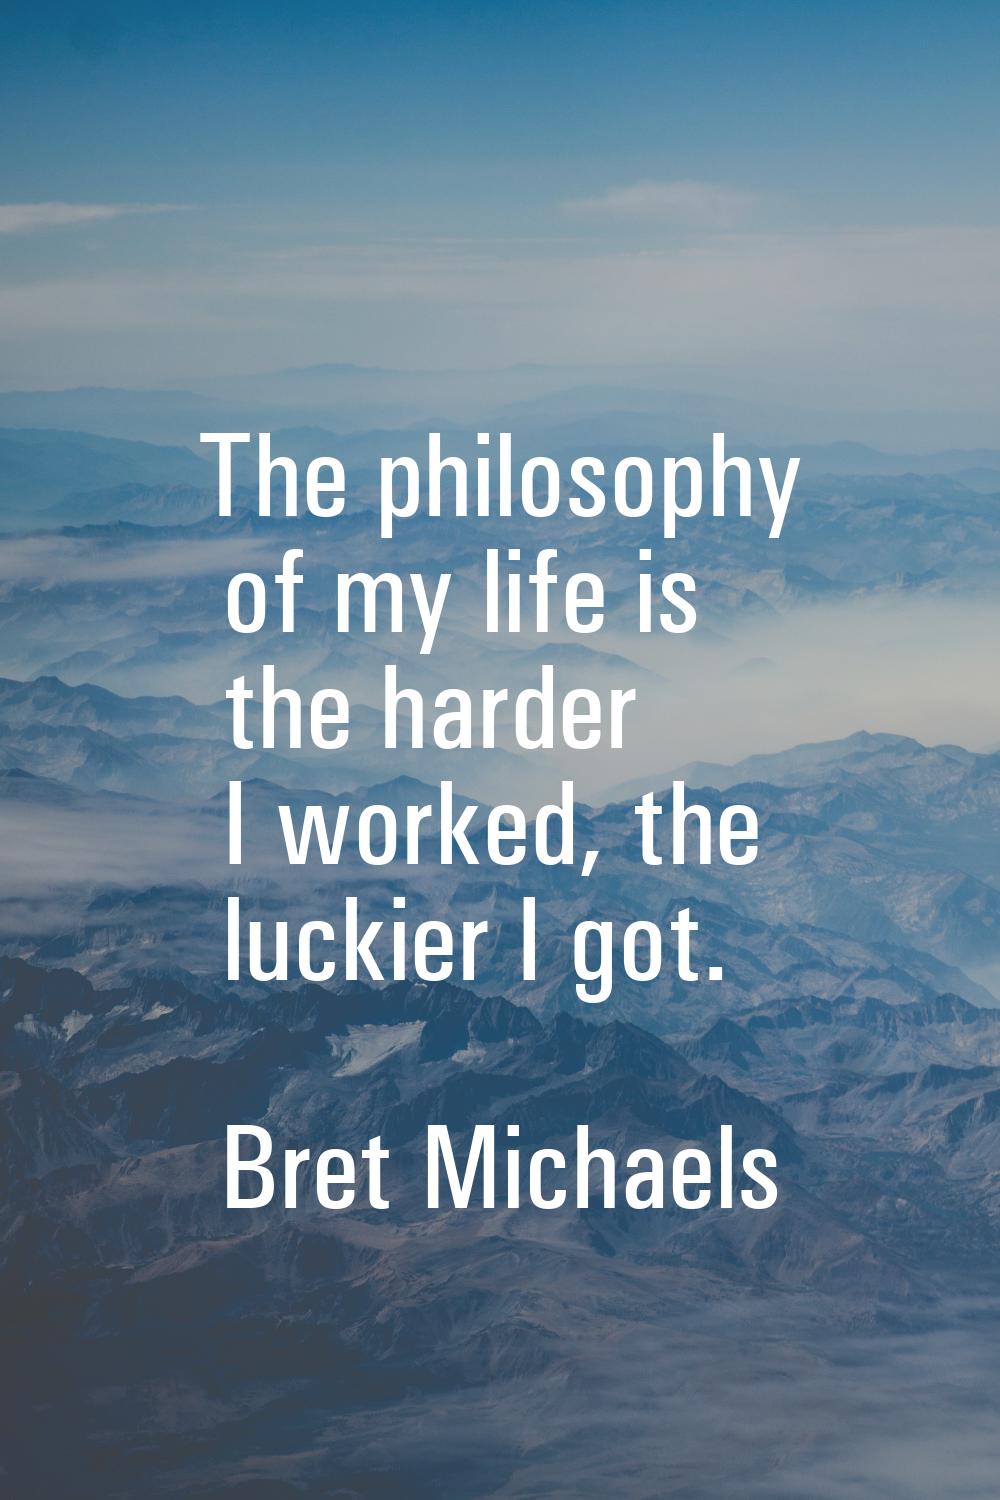 The philosophy of my life is the harder I worked, the luckier I got.